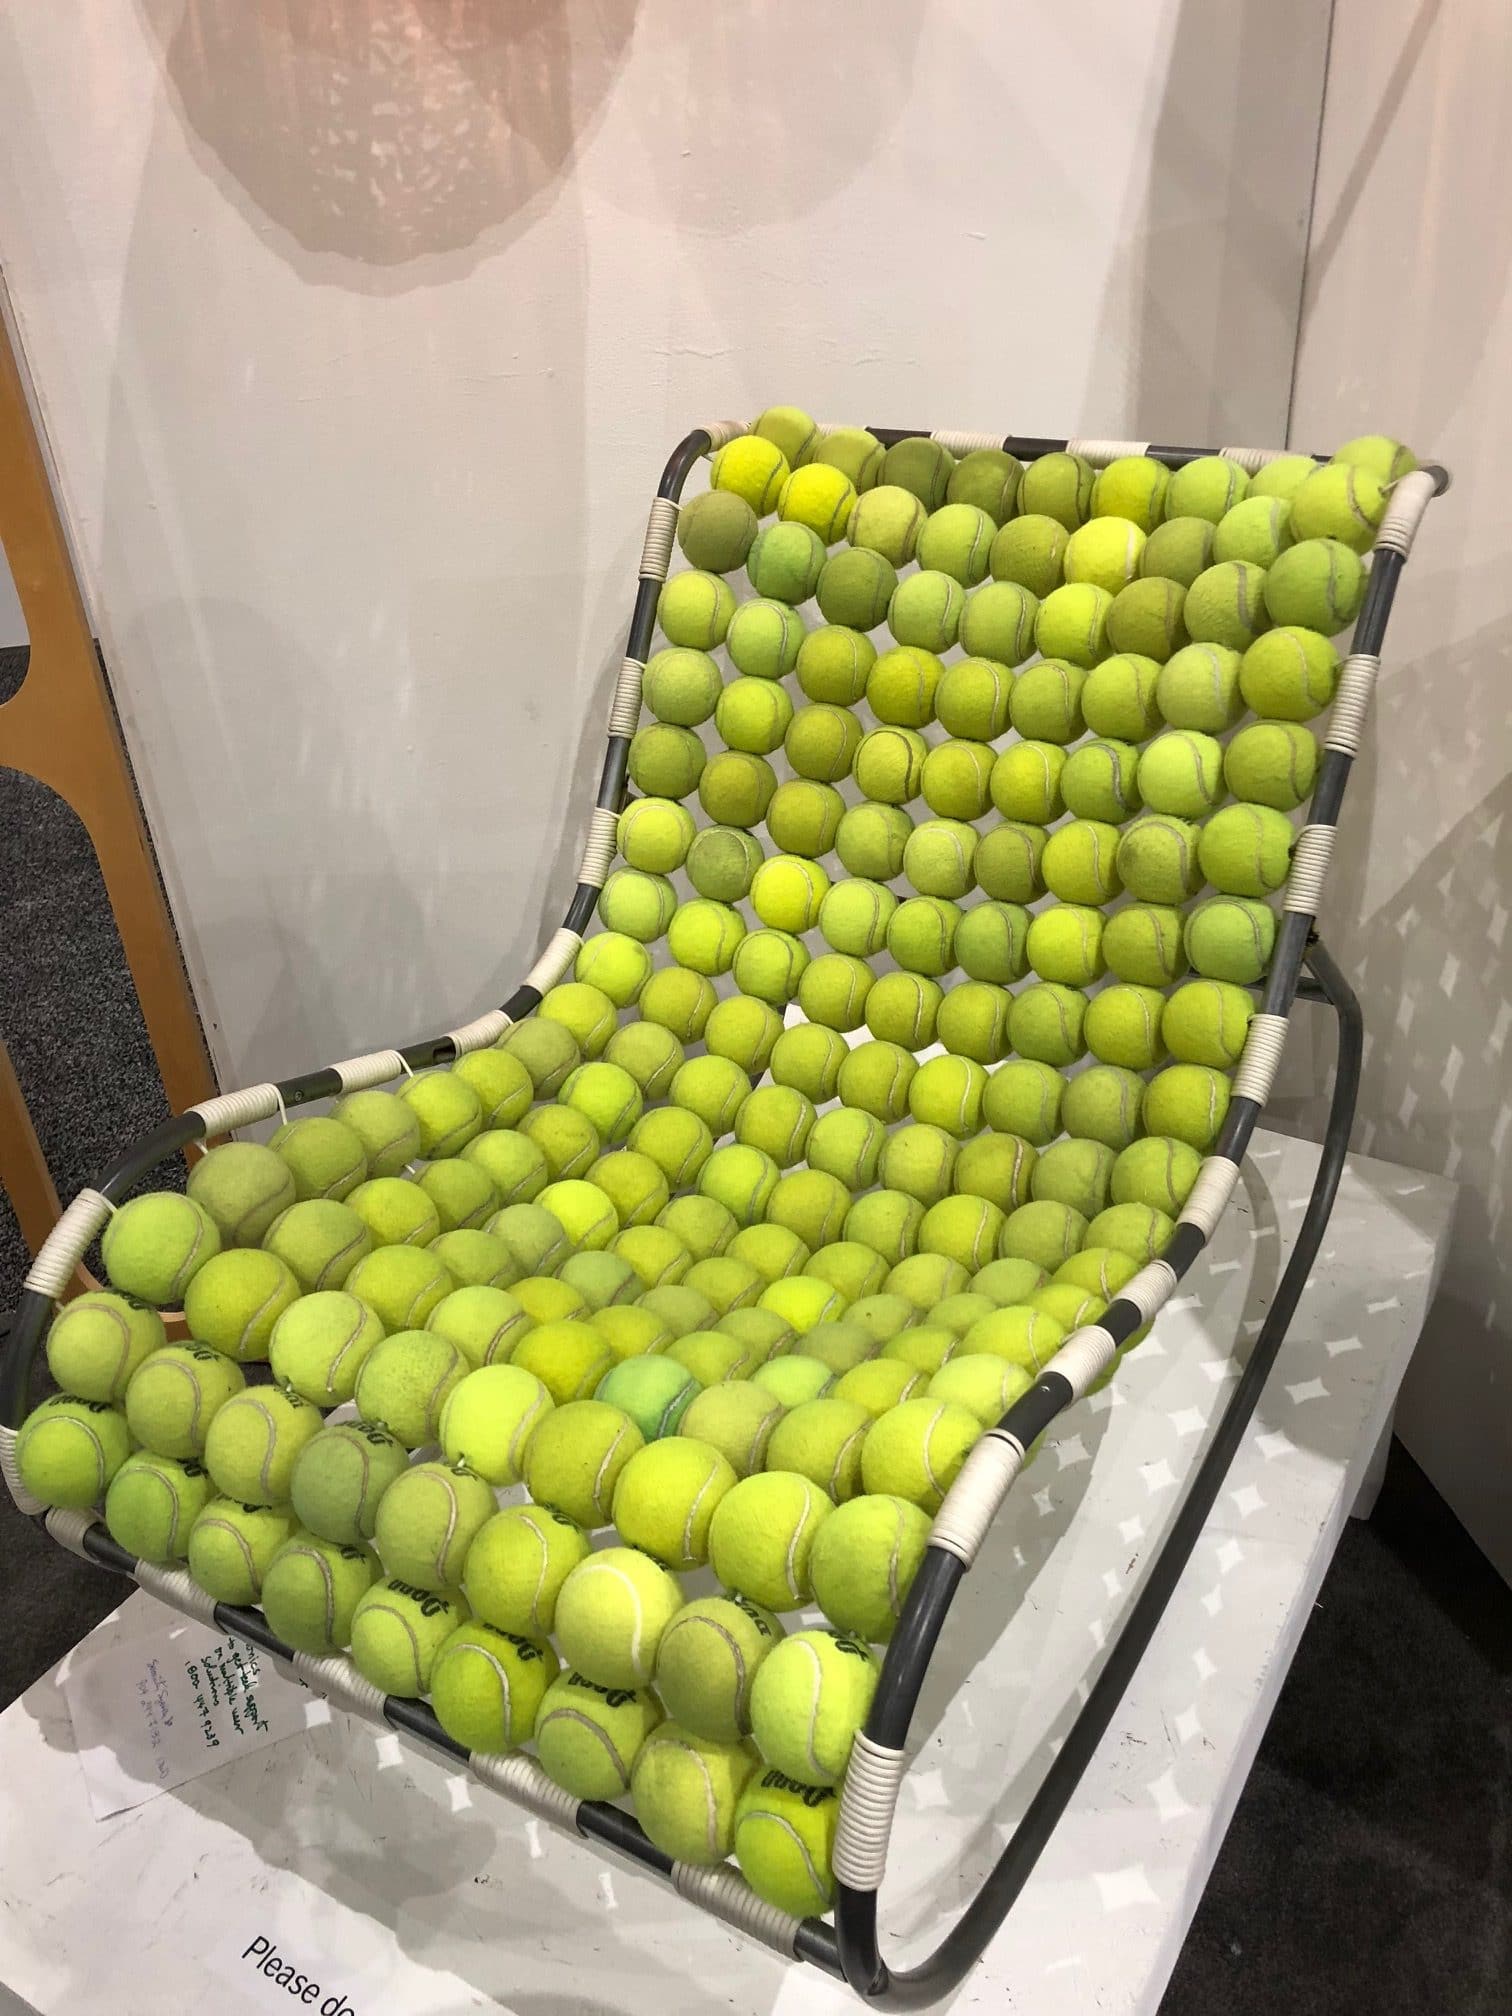 made-out-of-what-tennis-ball-chair-dwell-on-design-2018-los-angeles-e1523491395473.jpg